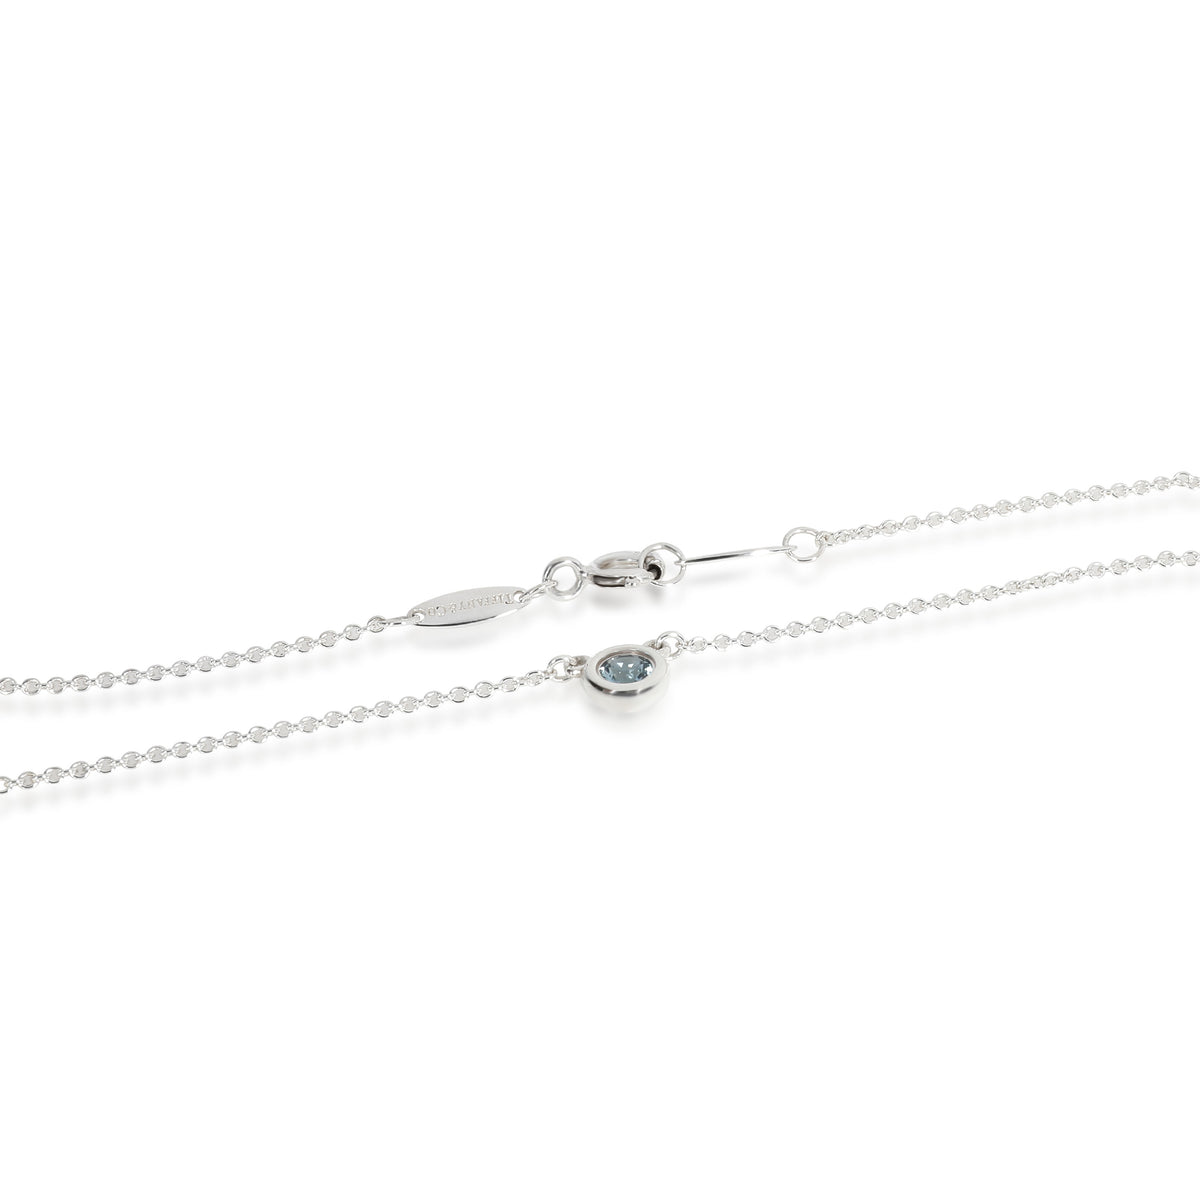 Tiffany & Co. Elsa Peretti Color by the Yard Necklace in Sterling Silver